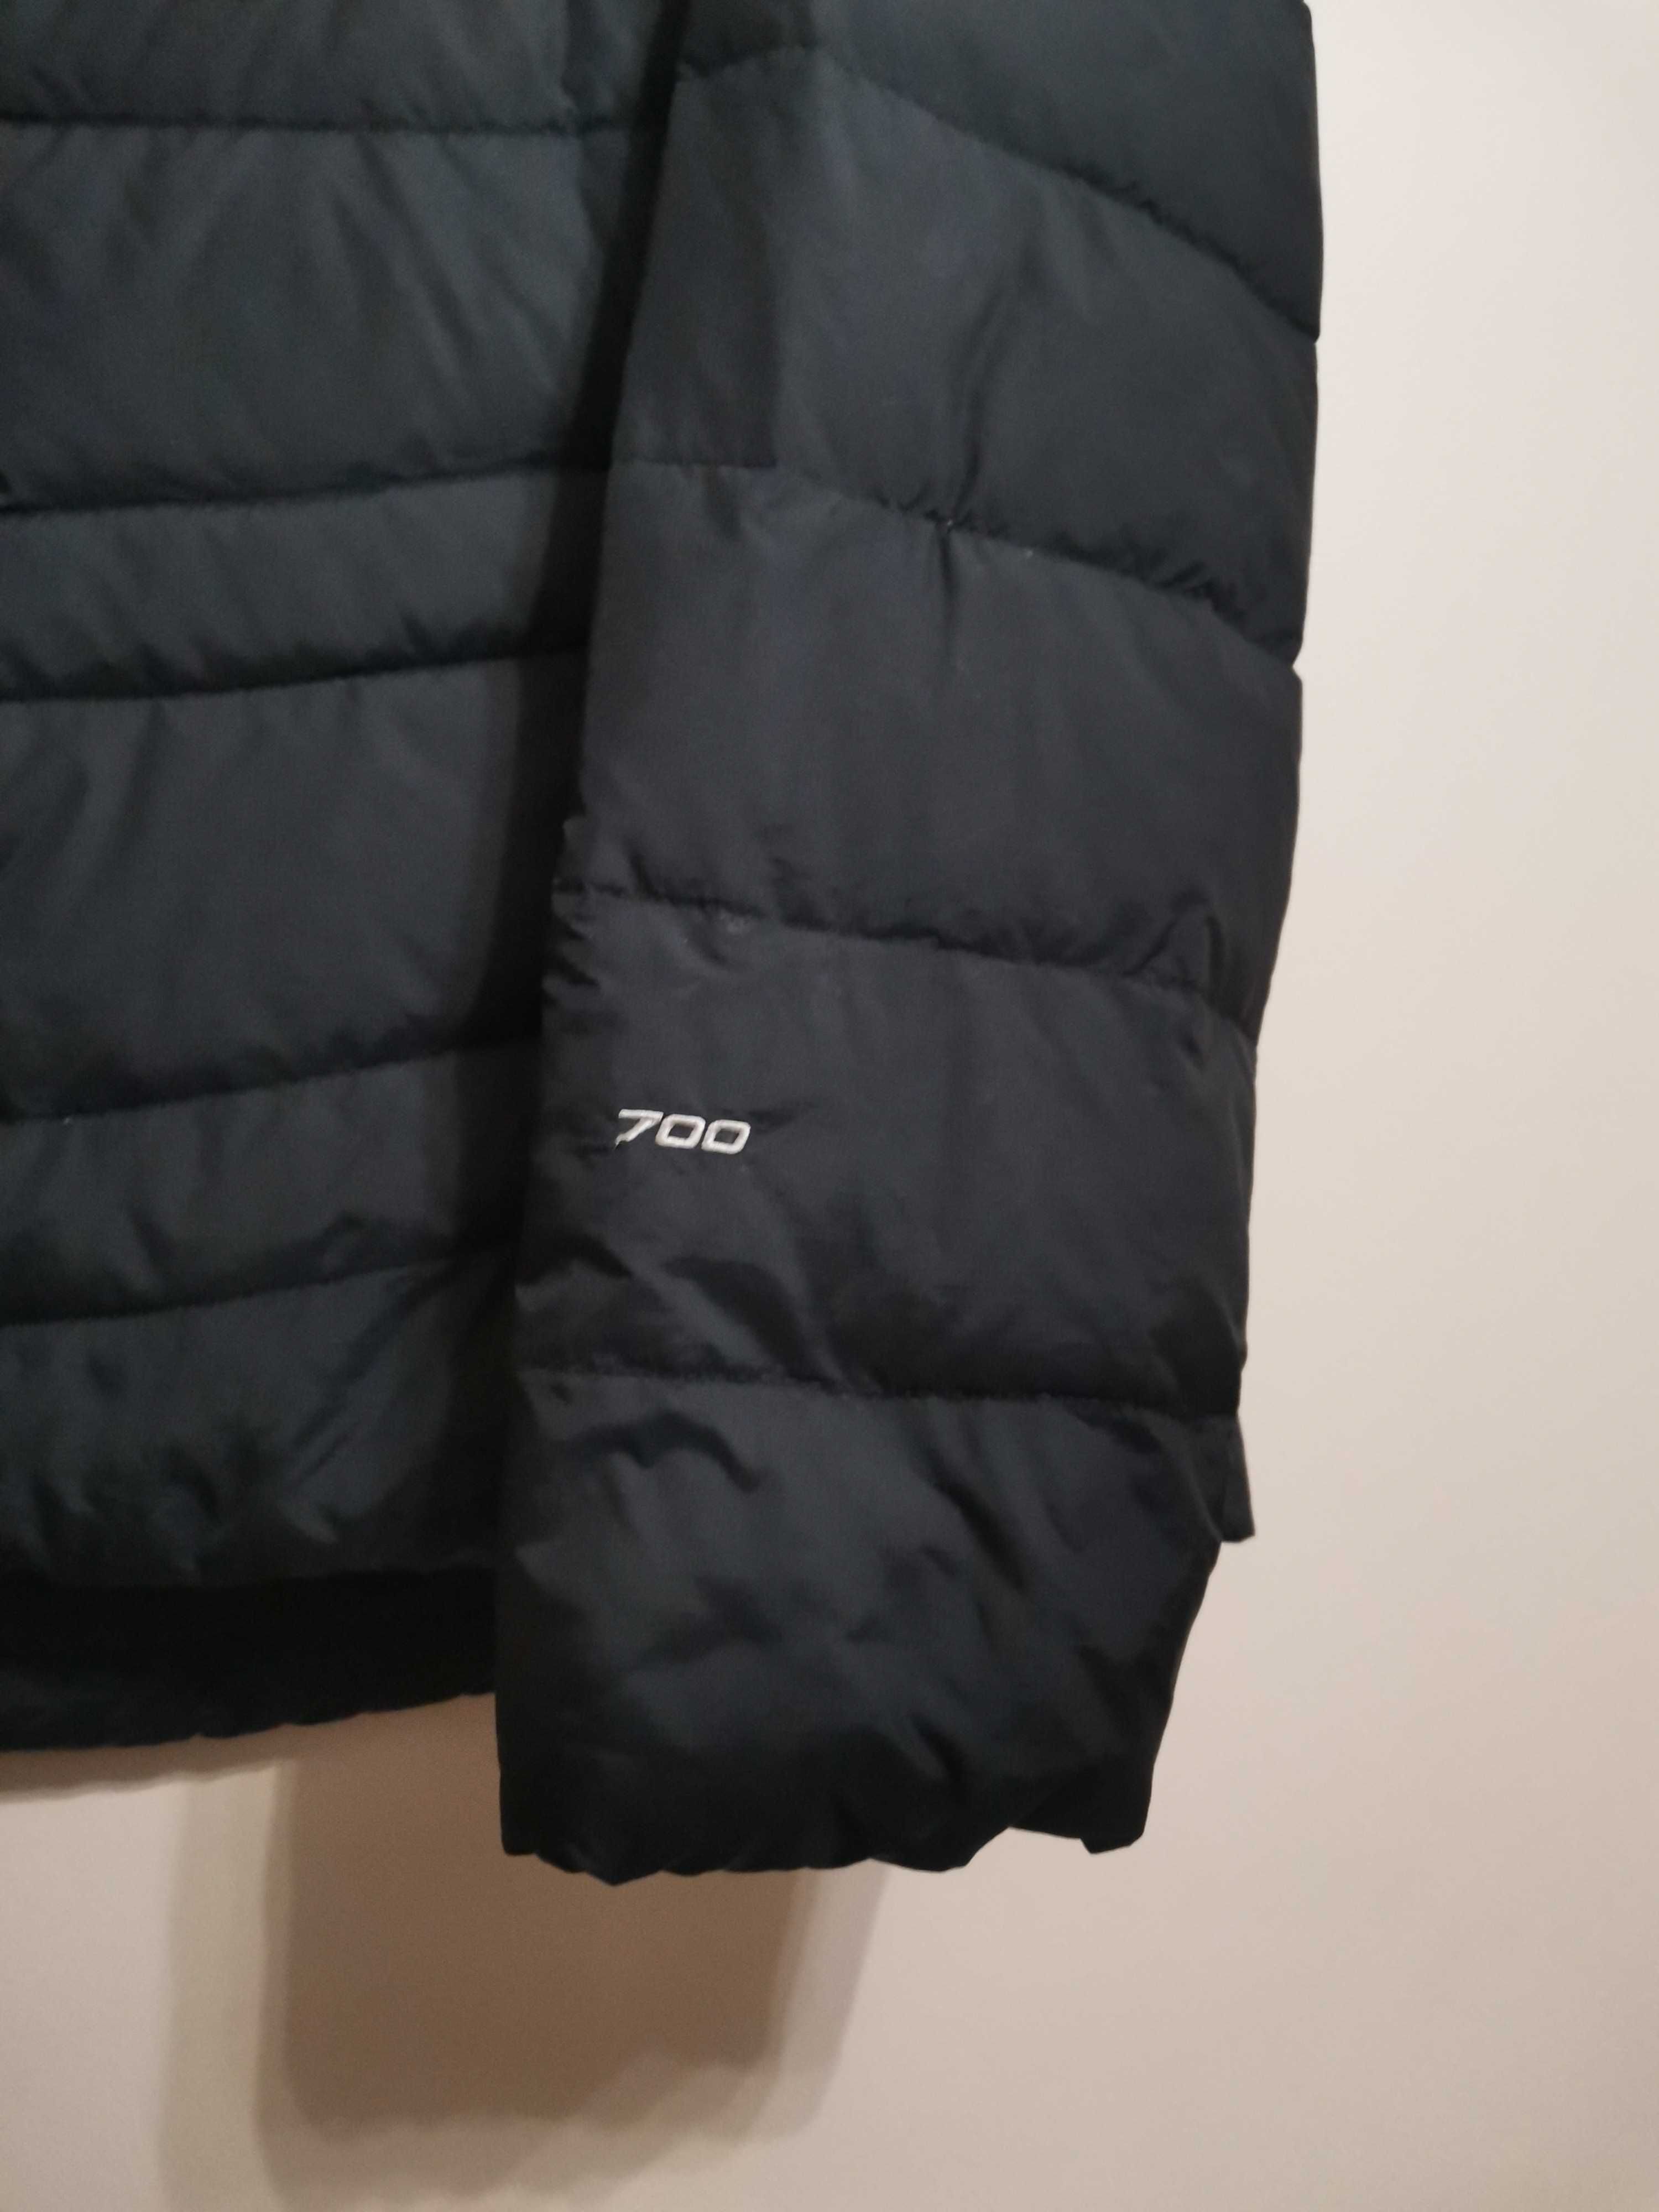 2 броя THE NORTH FACE 700 Down Puffer Jacket.